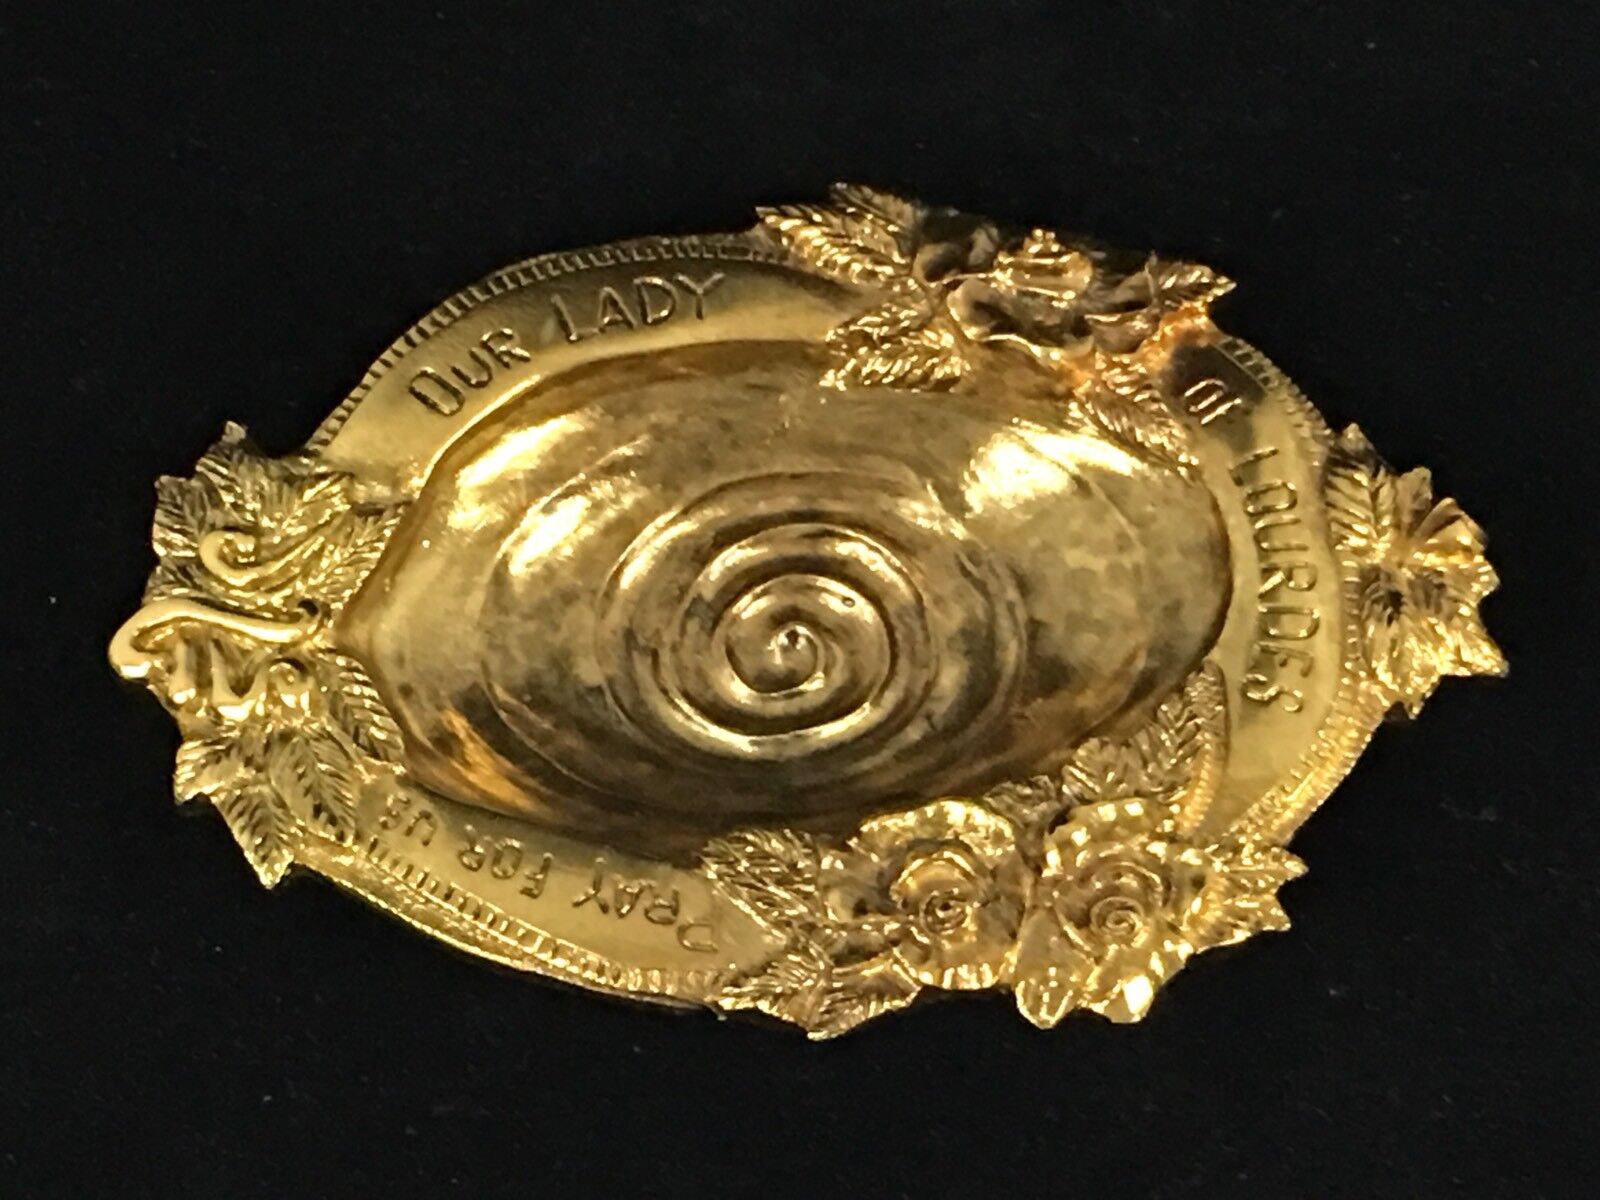 Our Lady of Lourdes Metal Gold-Tone 5” ROSE Embellished Footed Dish Plate Tray